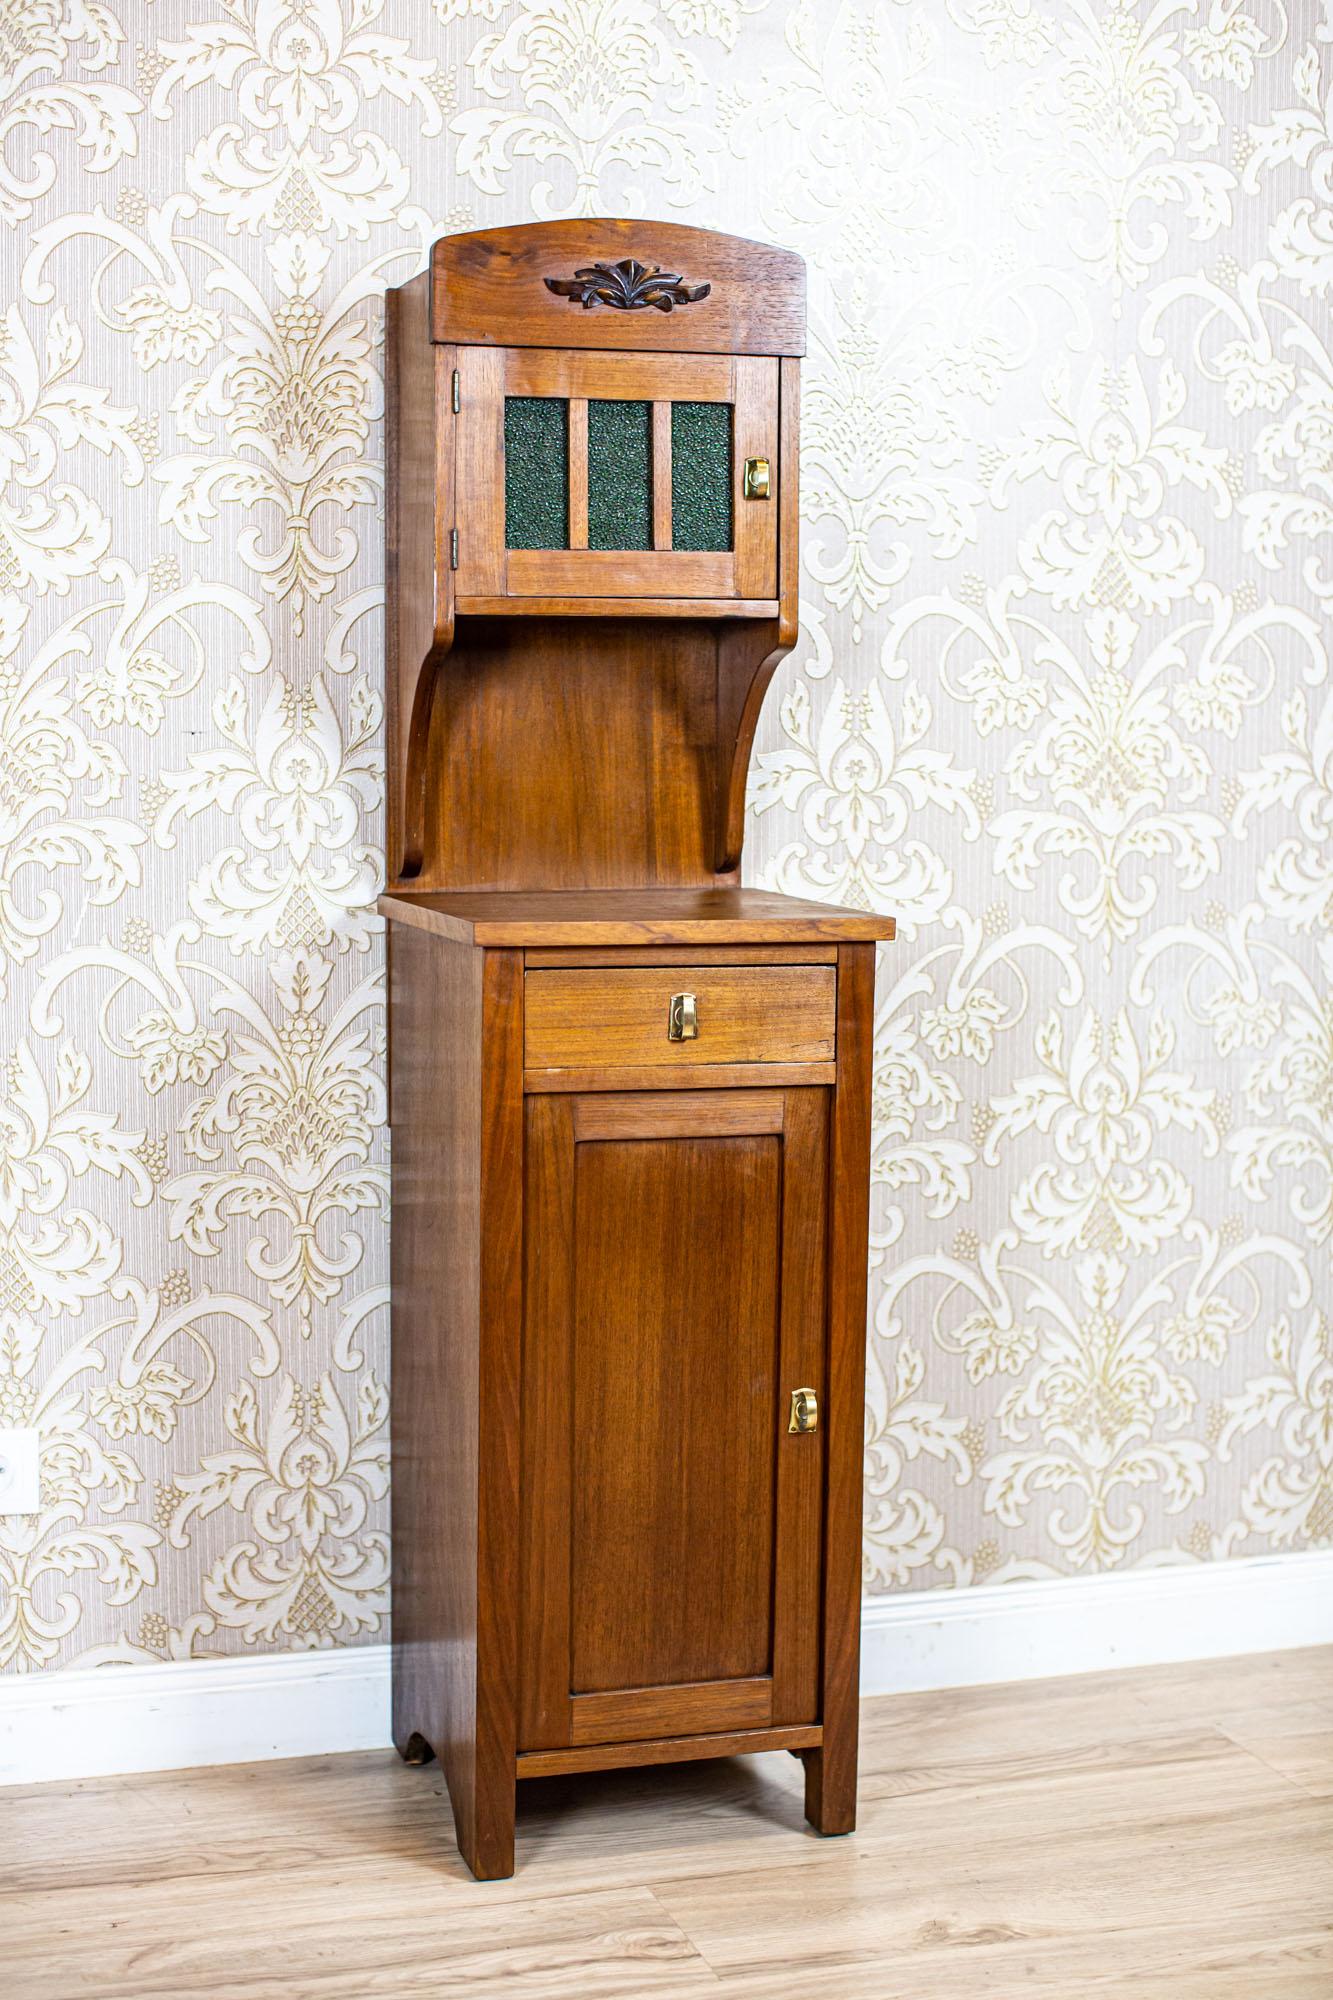 Art Nouveau Walnut Nightstand from the Early 20th Century with Glass Pane

A walnut piece of furniture composed of a single-leaf base and an add-on unit fixed to the rear wall, with original glass panes in the door leaf.
The escutcheons and ball